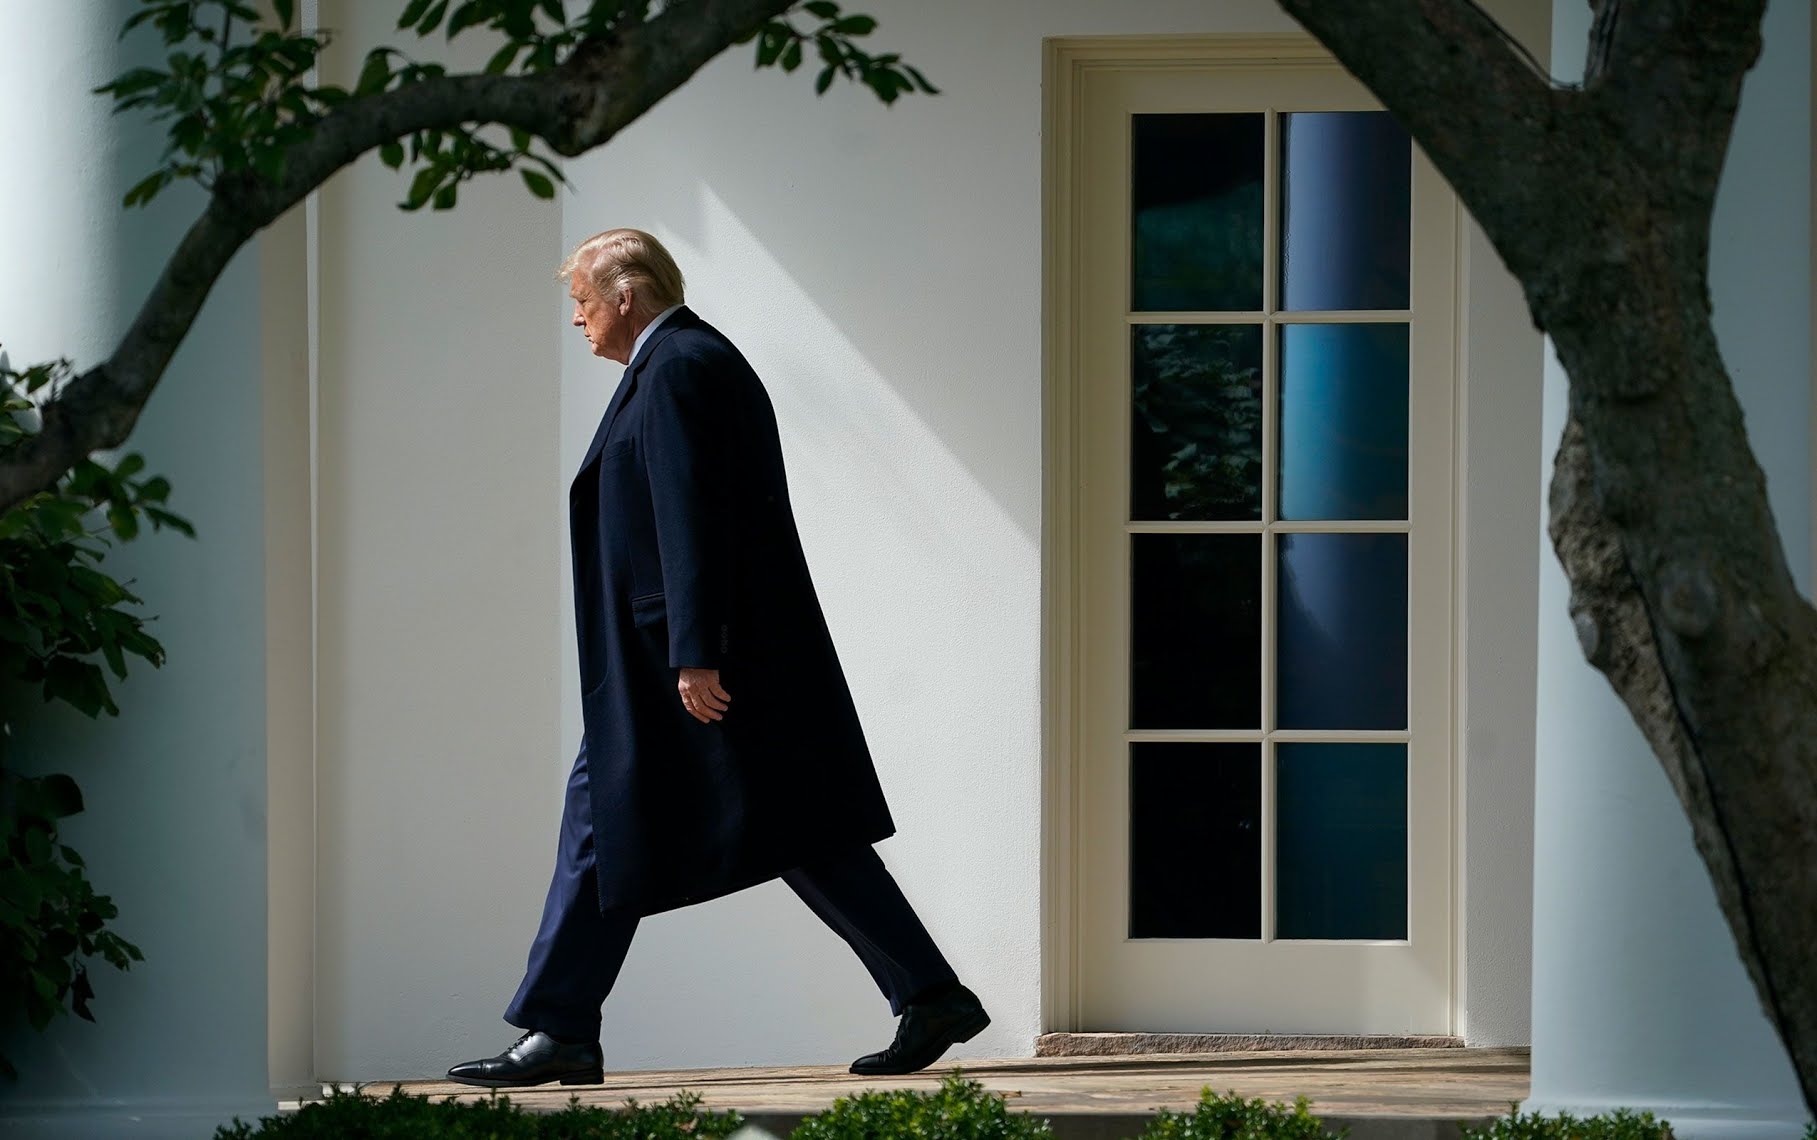 Then-President Donald Trump exits the Oval Office and walks to Marine One on the South Lawn of the White House on October 1, 2020.